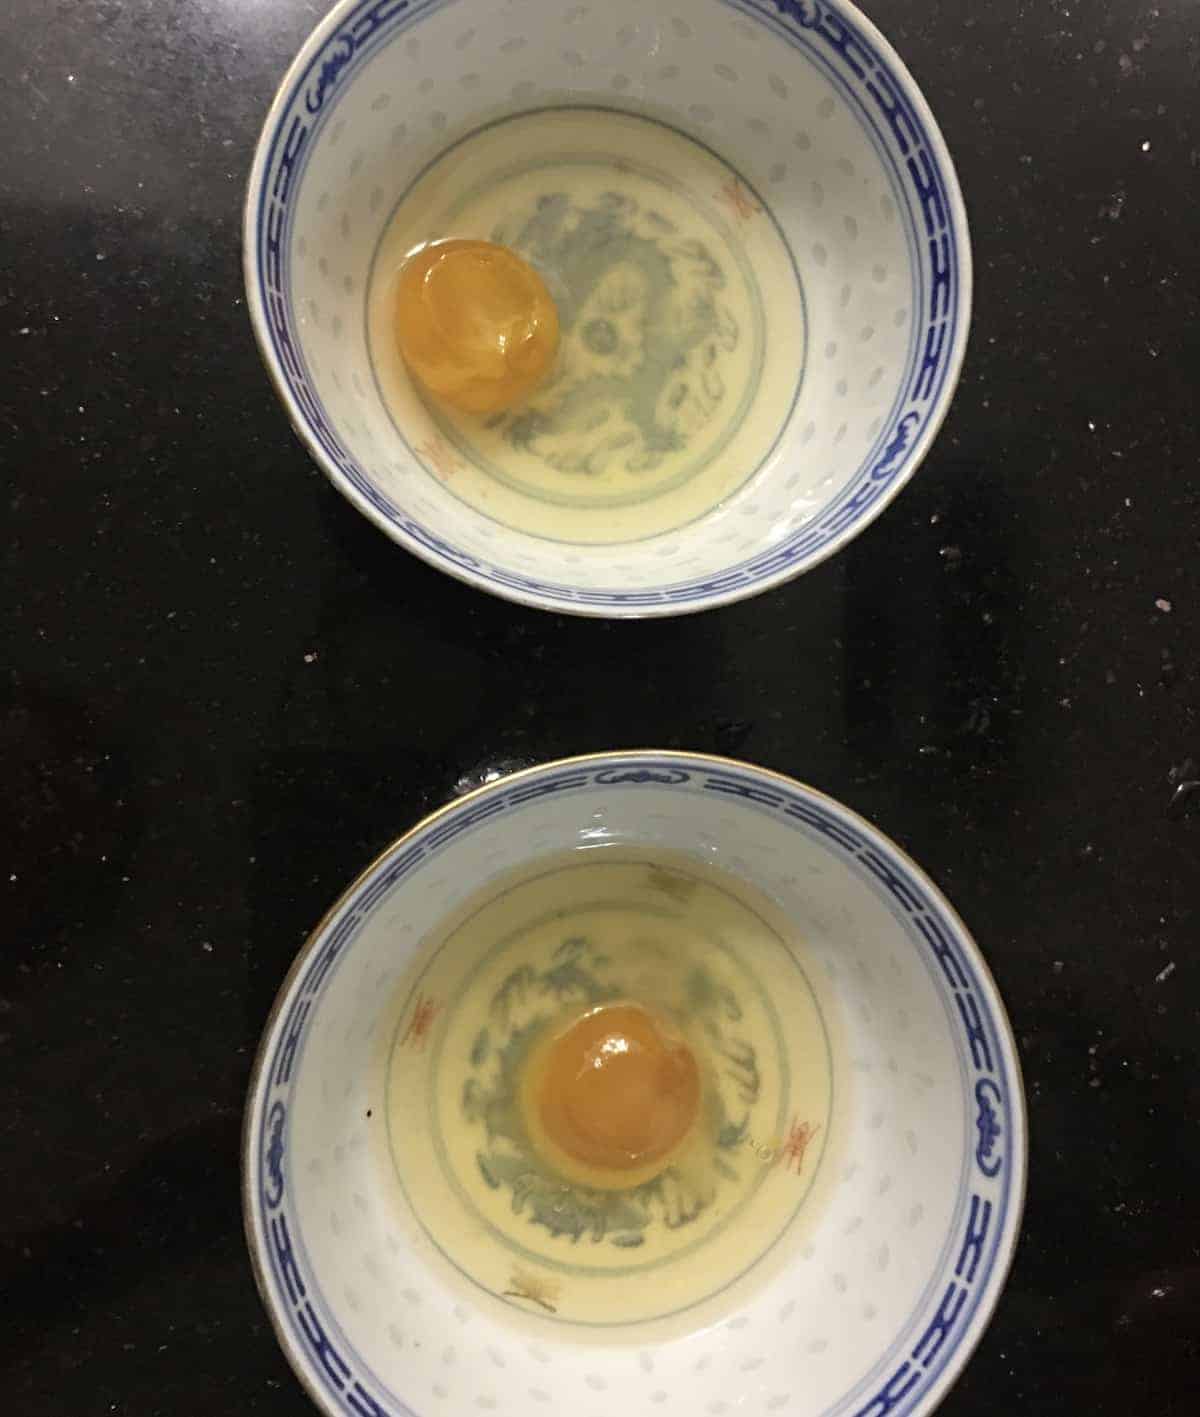 Comparing <span style='background-color:none;'></noscript>salted eggs</span><span style='background-color:none;'> </span>made with and without shaoxing to see if the yolk became brighter.